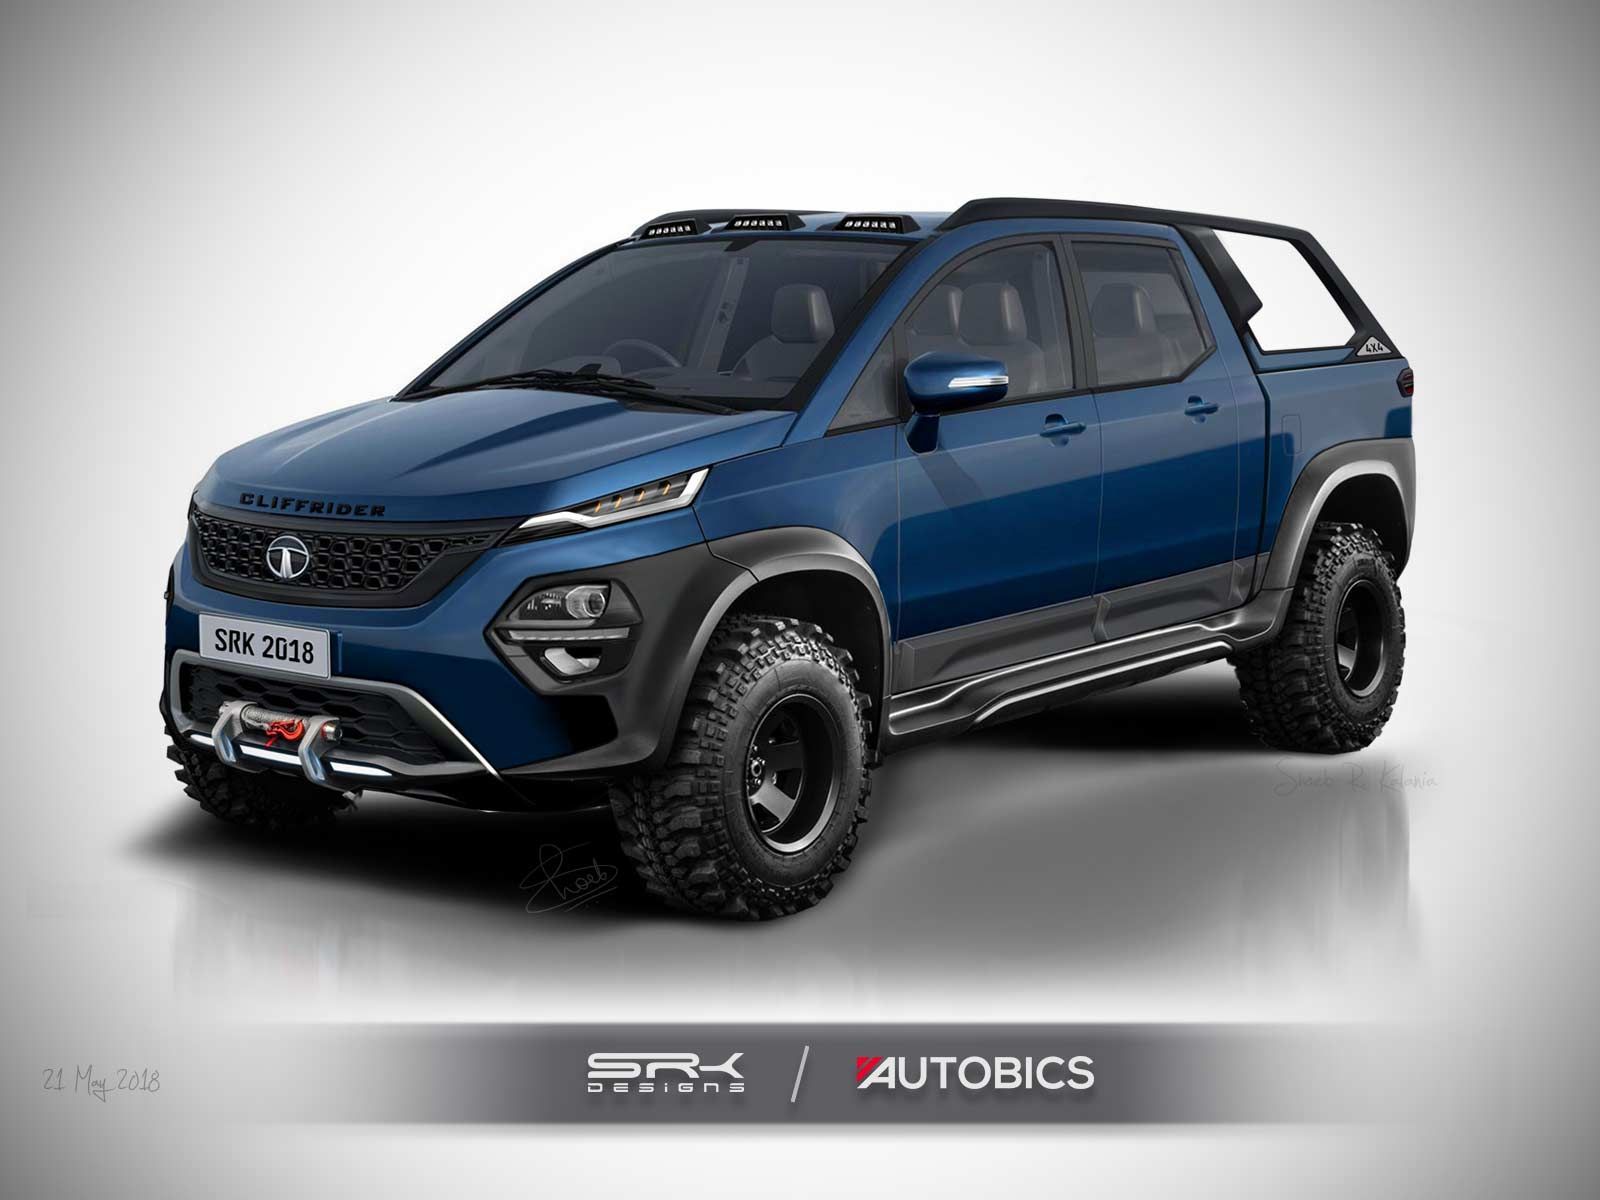 Taking inspiration from the original Tata Cliffrider Concept, here is a rendering based on the Hexa of the the Tata Hexa Cliffrider. Tata, Car mods, Concept cars